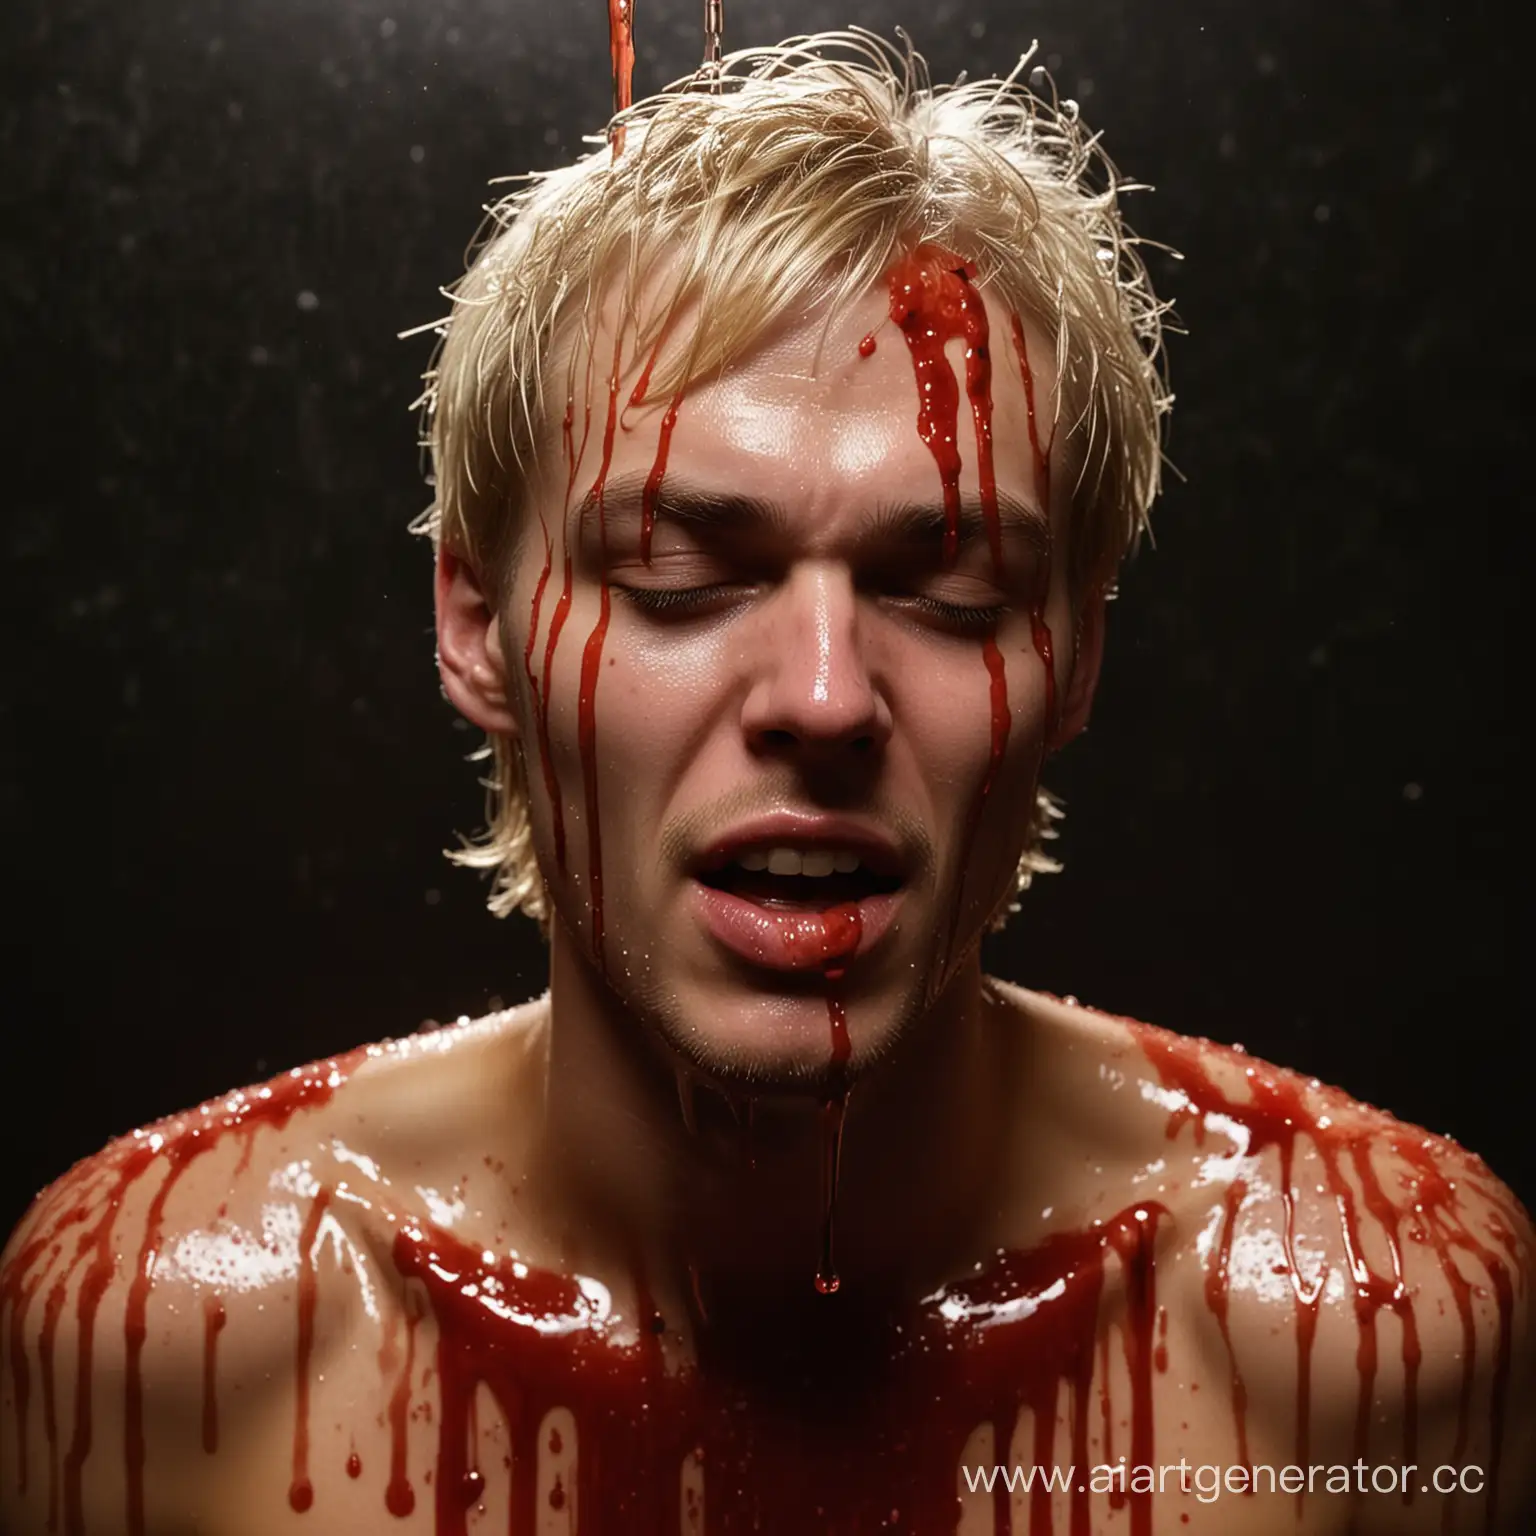 Blonde-Man-Covered-in-Red-Liquid-Looking-Up